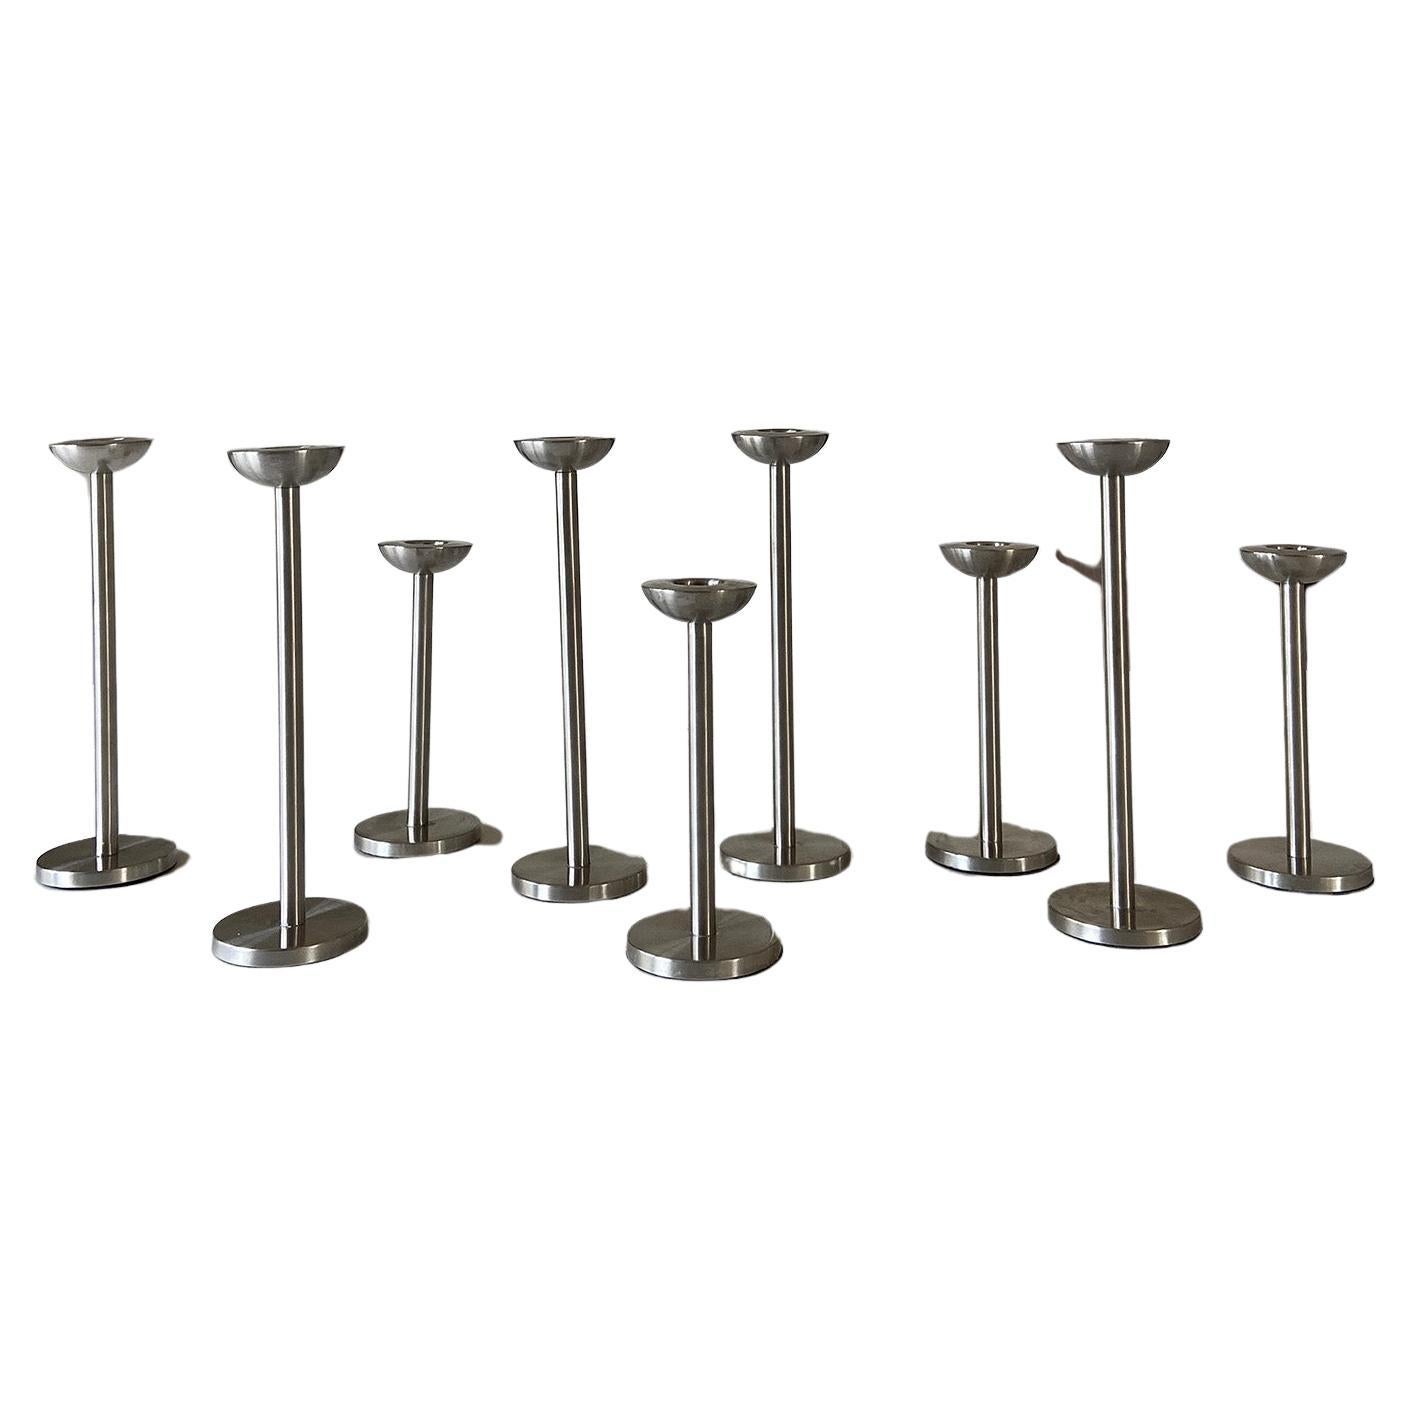 German Stainless Steel Minimalist Design Candle Holder set of 9 For Sale